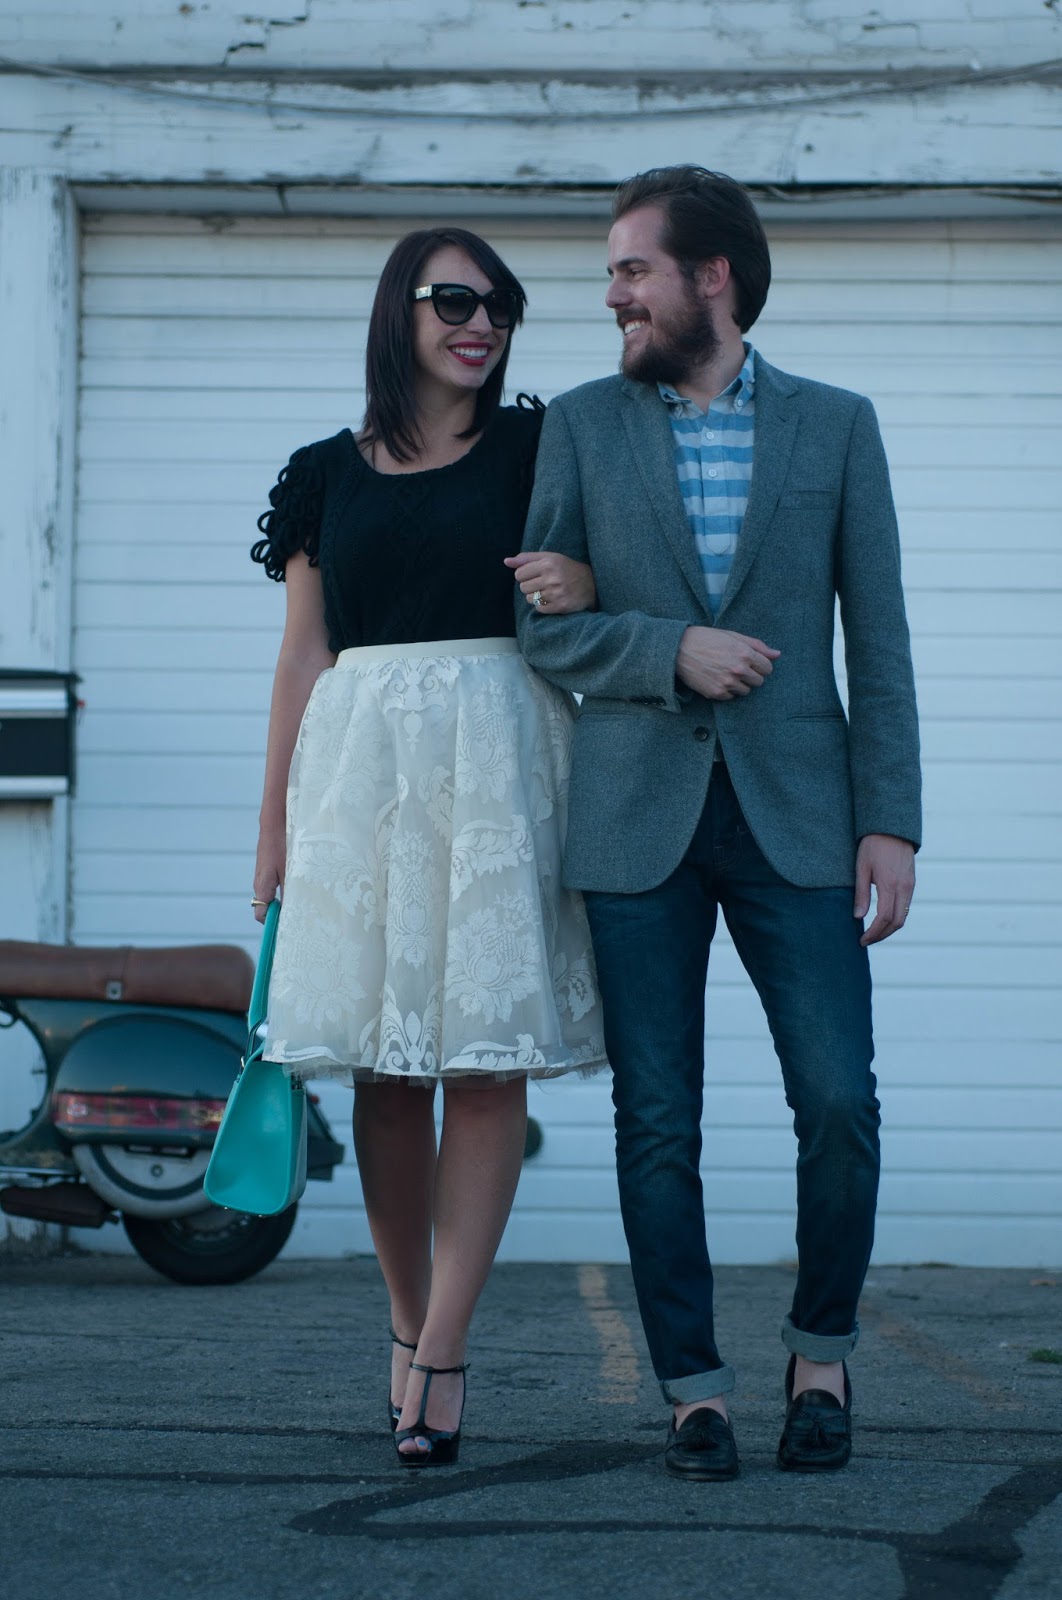 couples style, couples fashion, his and her fashion, ootd, anthropologie ootd, jcrew men, red lipstick